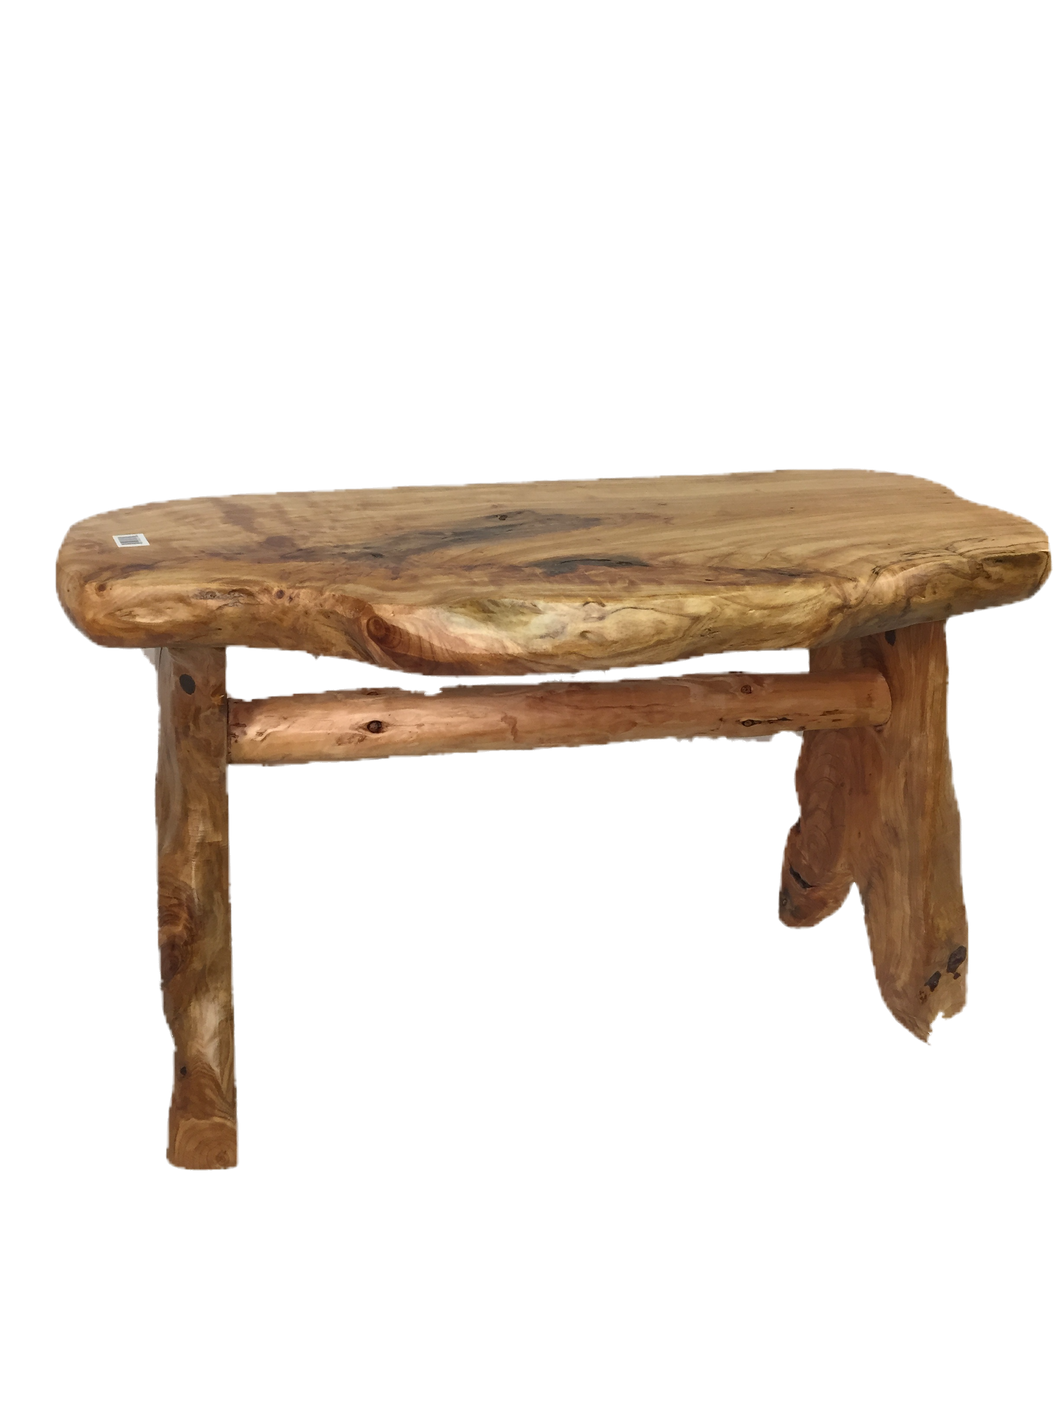 Hand-Crafted Root Wood Live Edge Bench - Medium (L 28